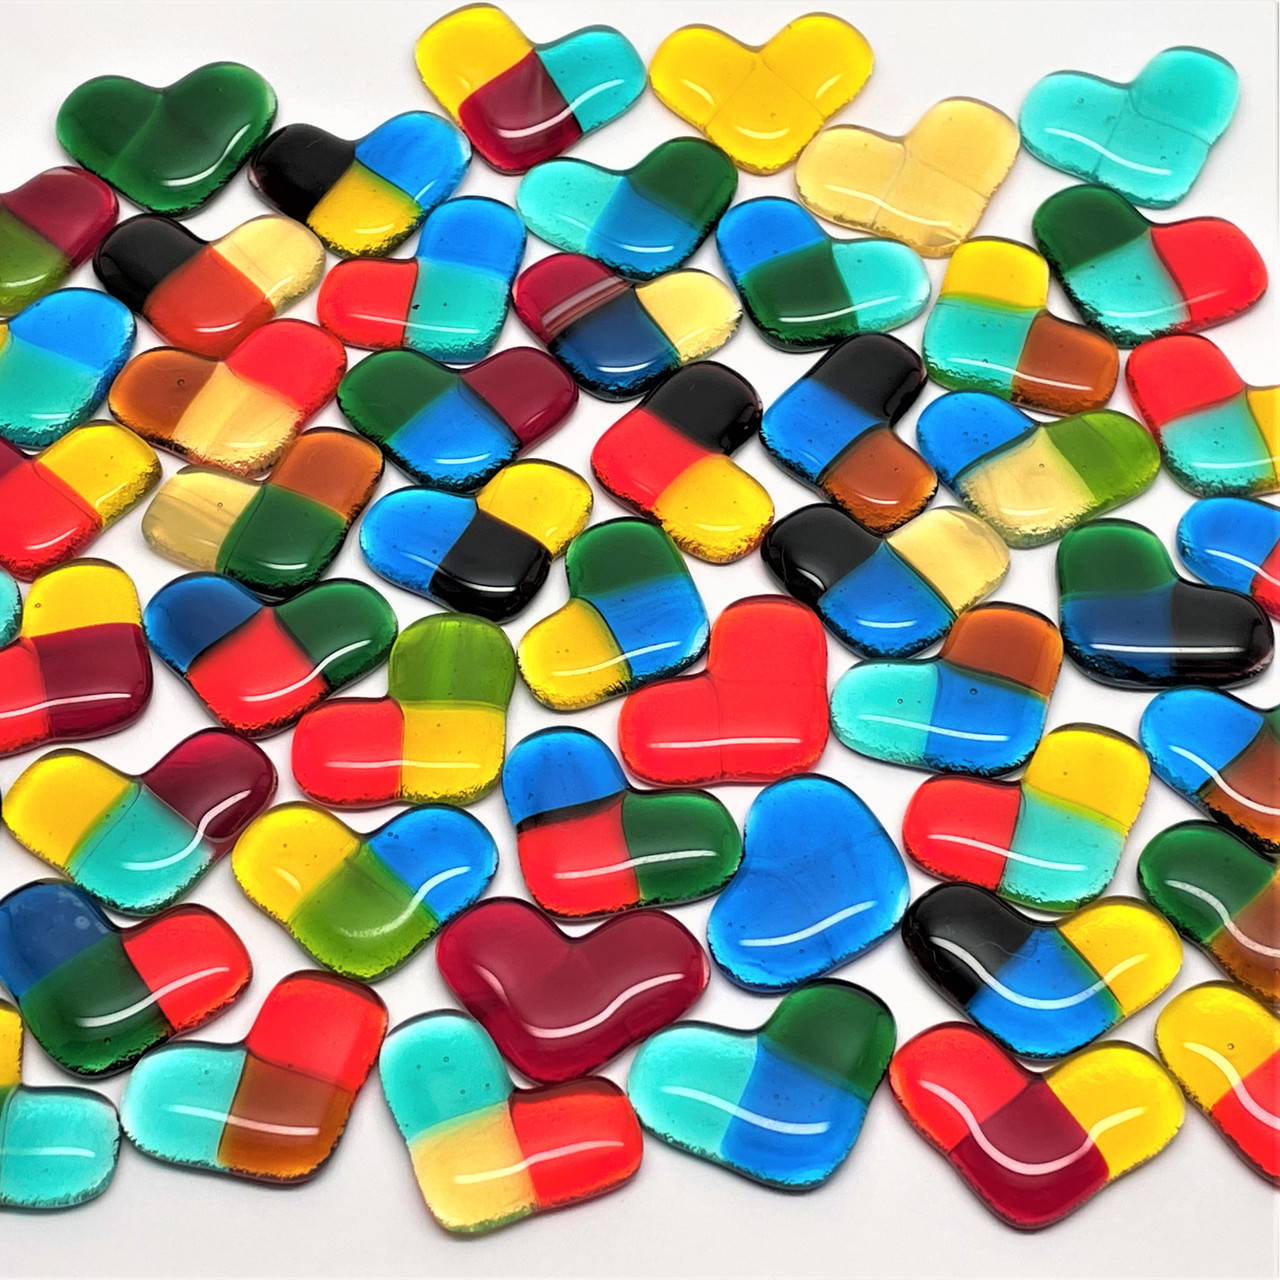 Translucent Mix Stained Glass Mosaic Tiles